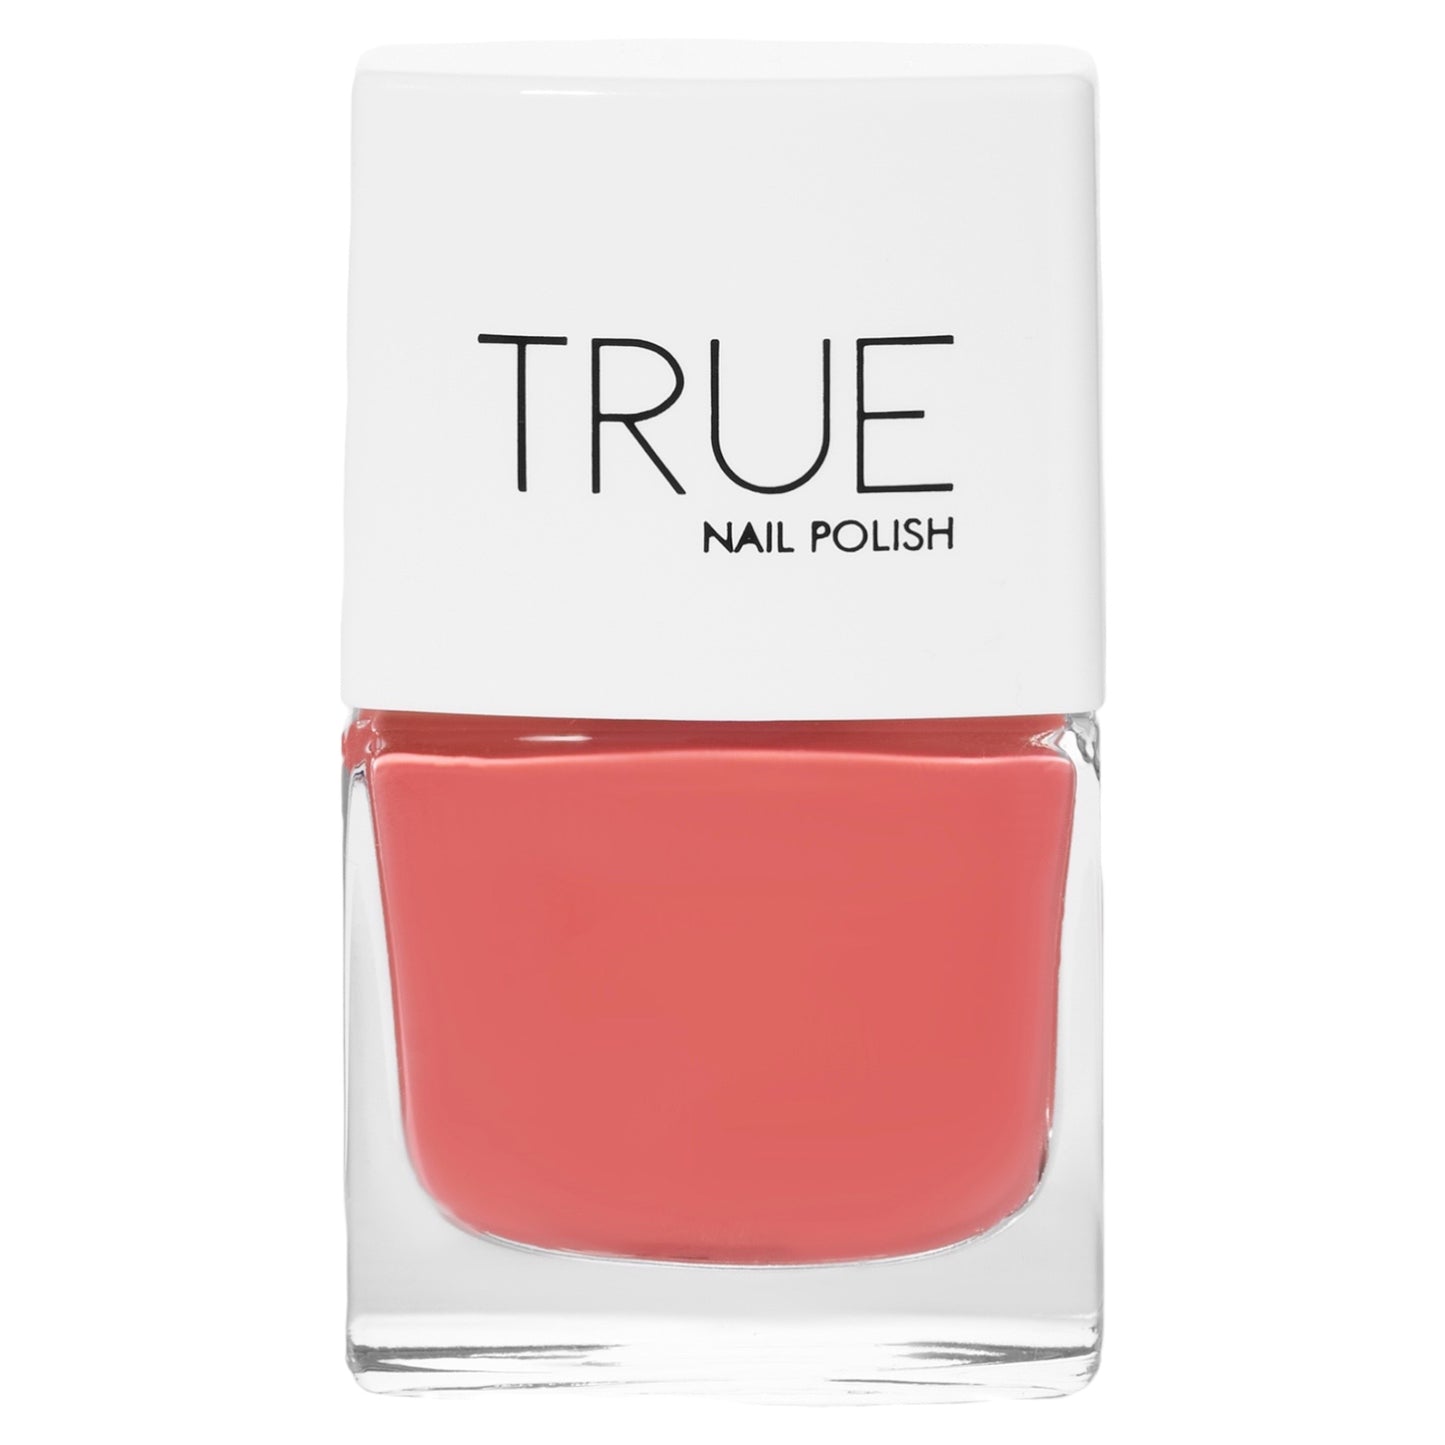 A bottle of Devotion, a coral shade from True Nail Polish